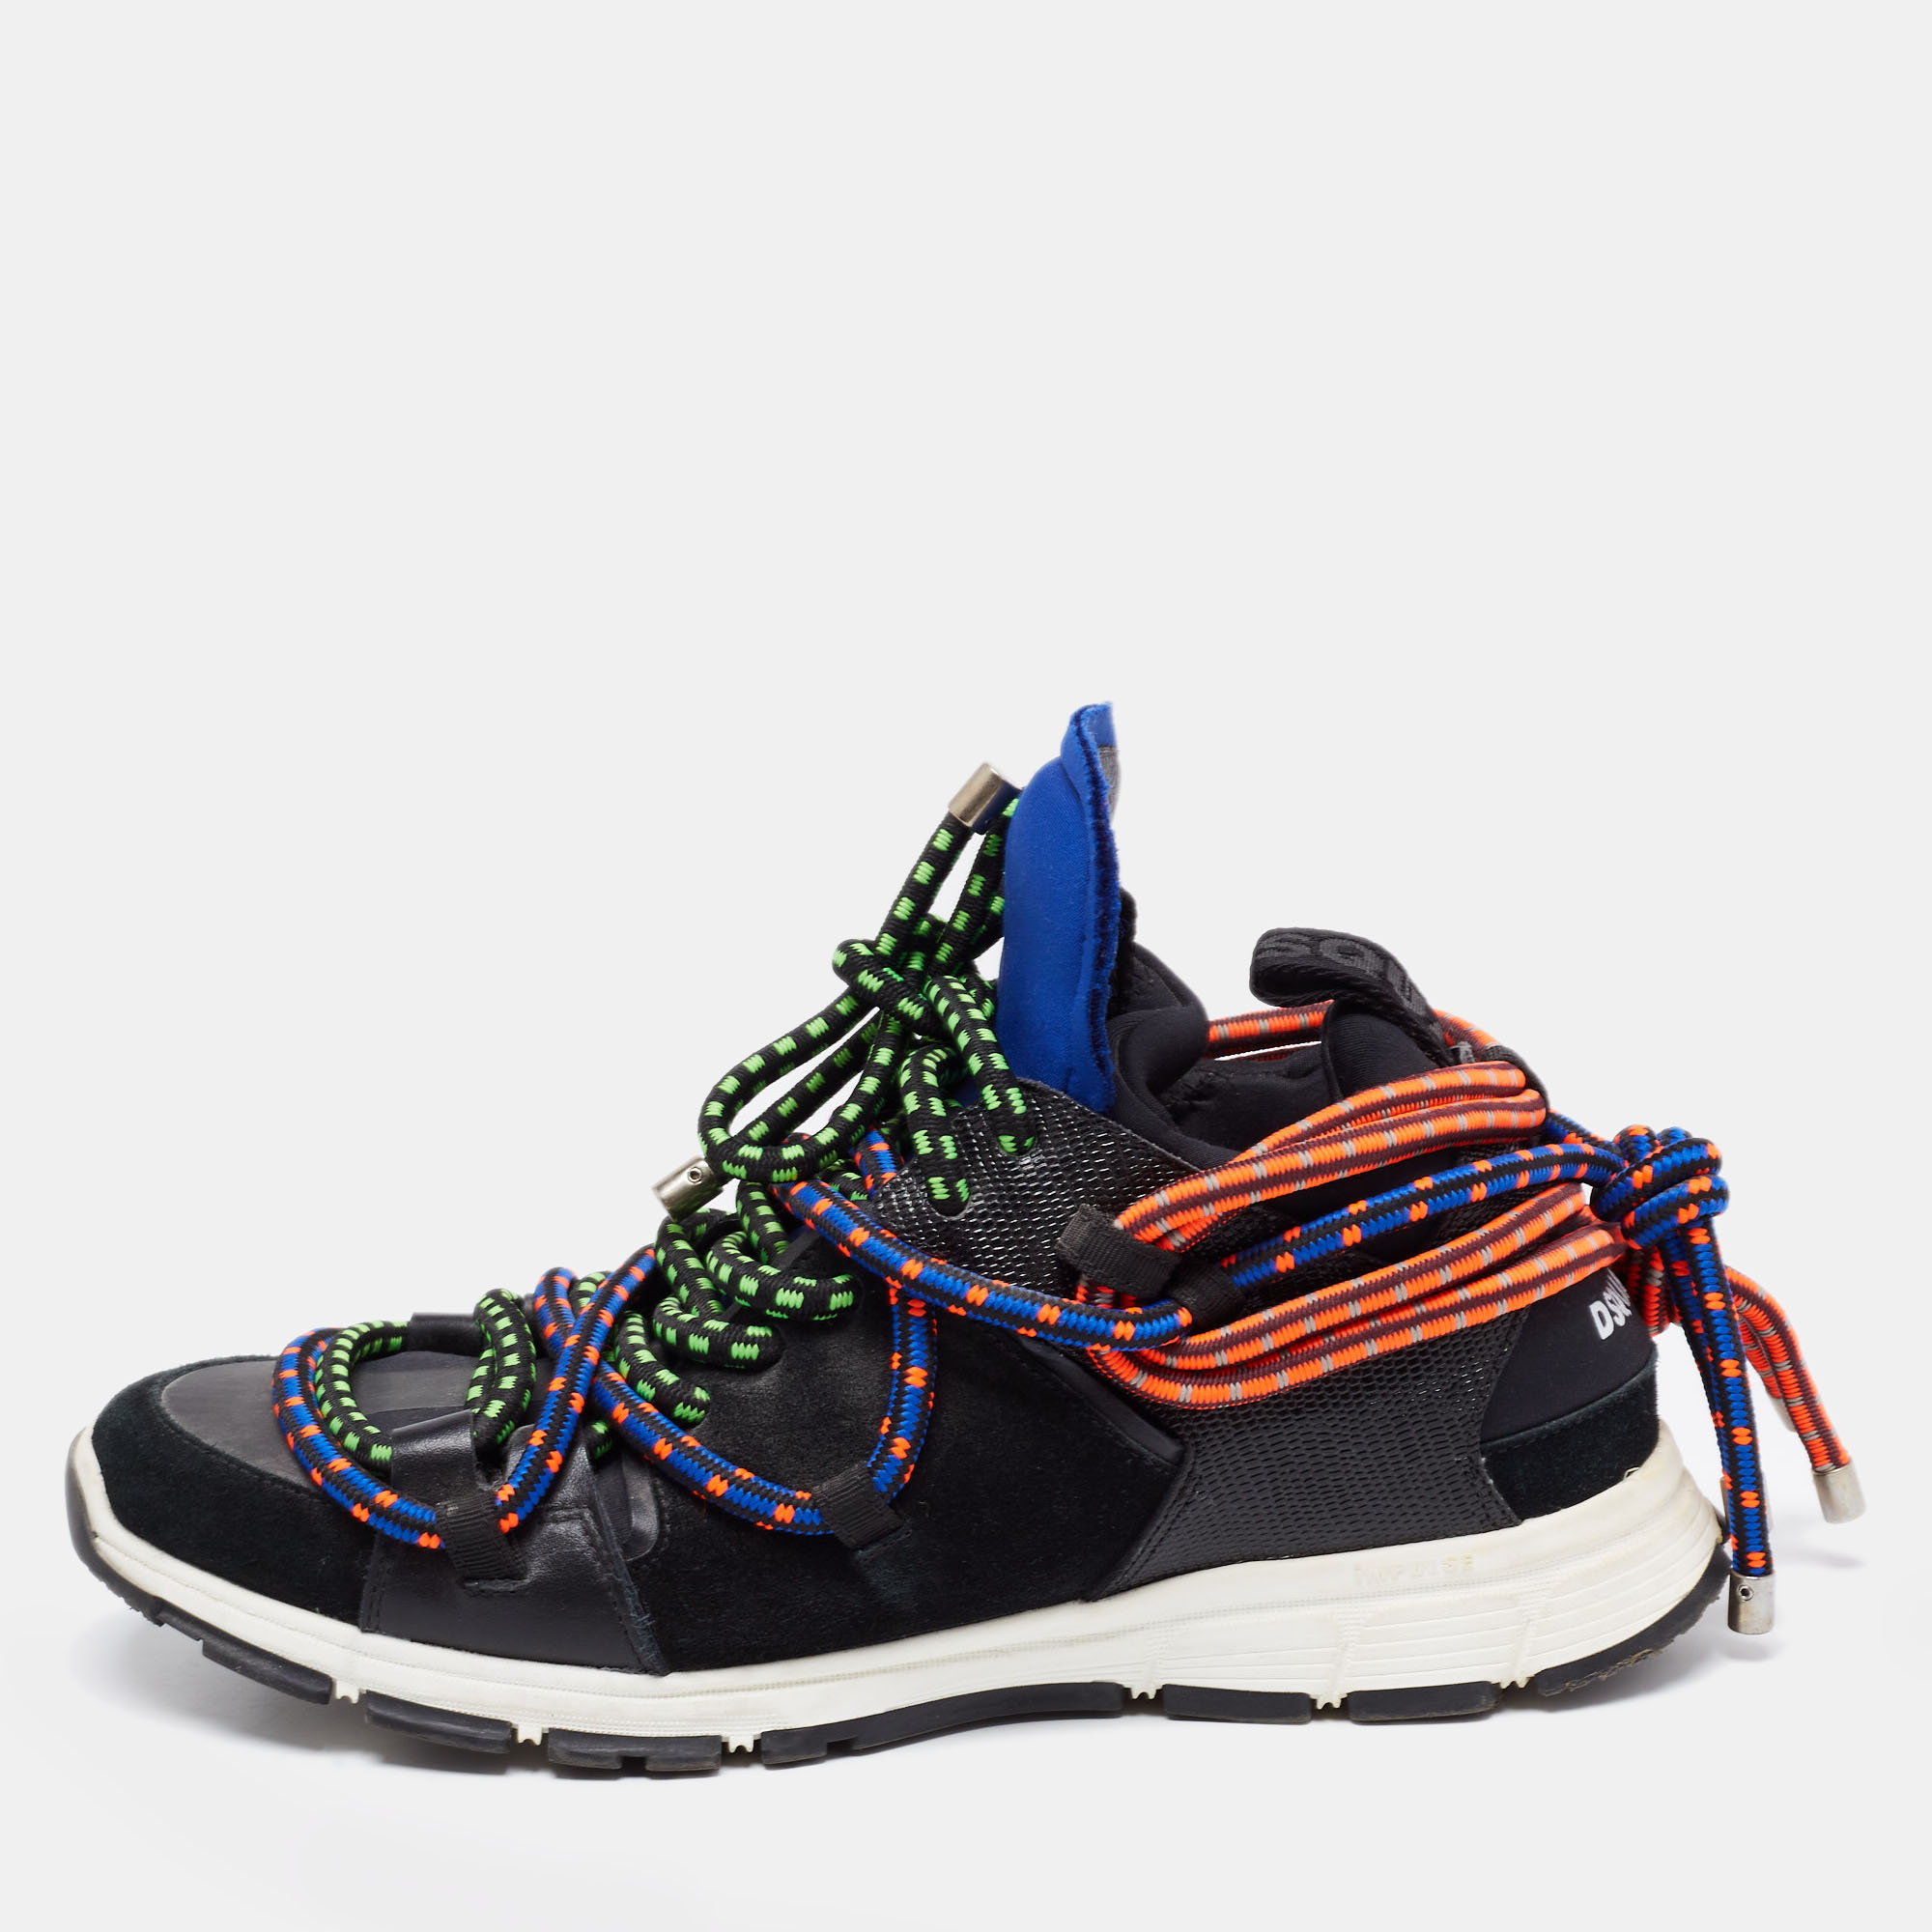 Complete your casual look by sporting these Bungy Jump sneakers from Dsquared2. Fashioned in multicolored suede and leather these sneakers showcase lace up fastenings on their vamps. These Dsquared2 sneakers are worth the splurge